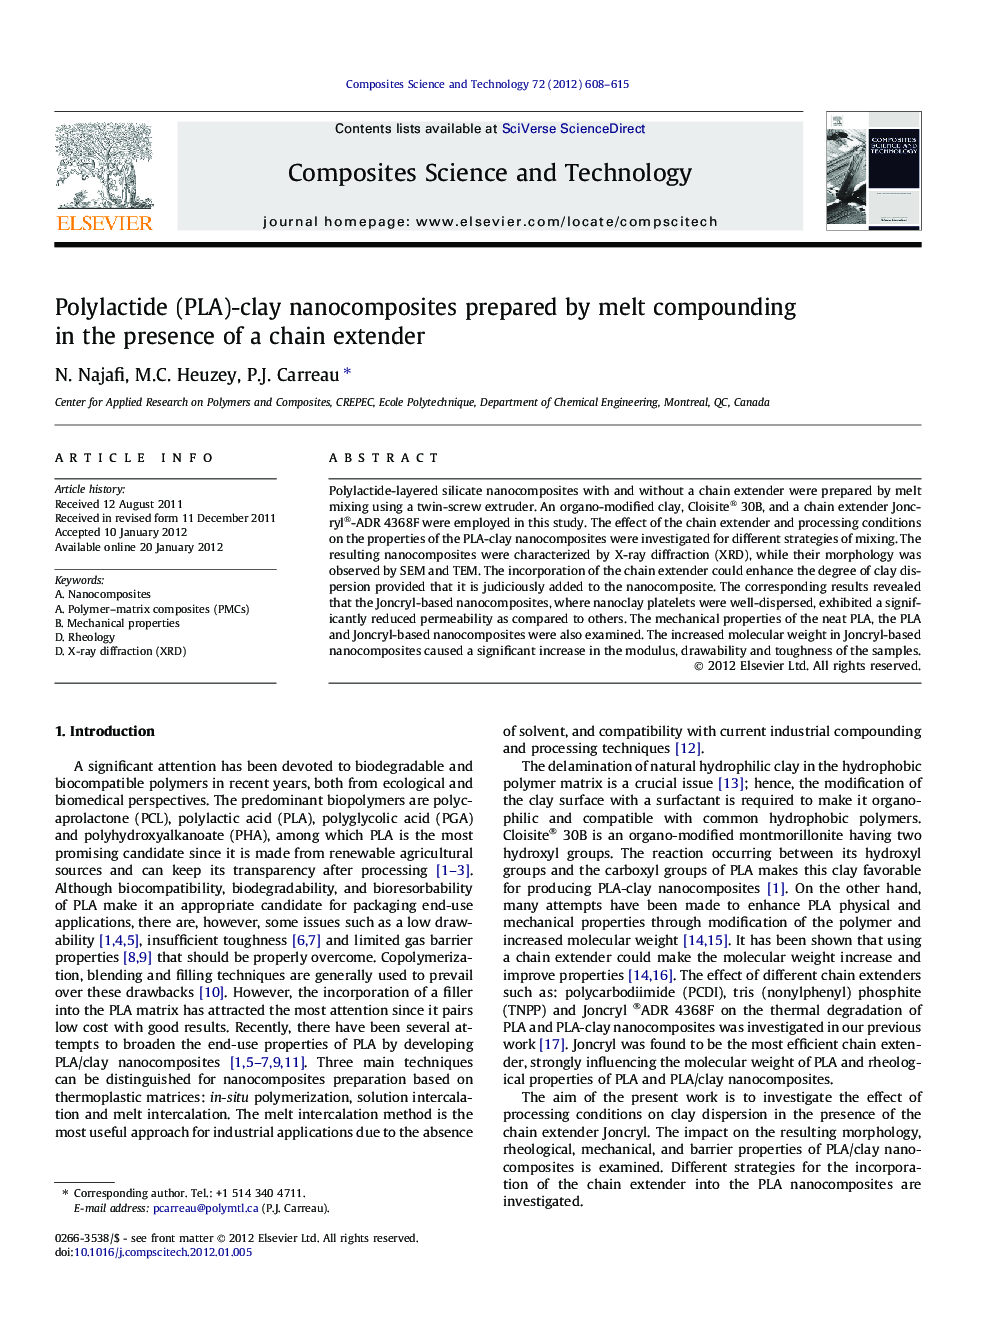 Polylactide (PLA)-clay nanocomposites prepared by melt compounding in the presence of a chain extender